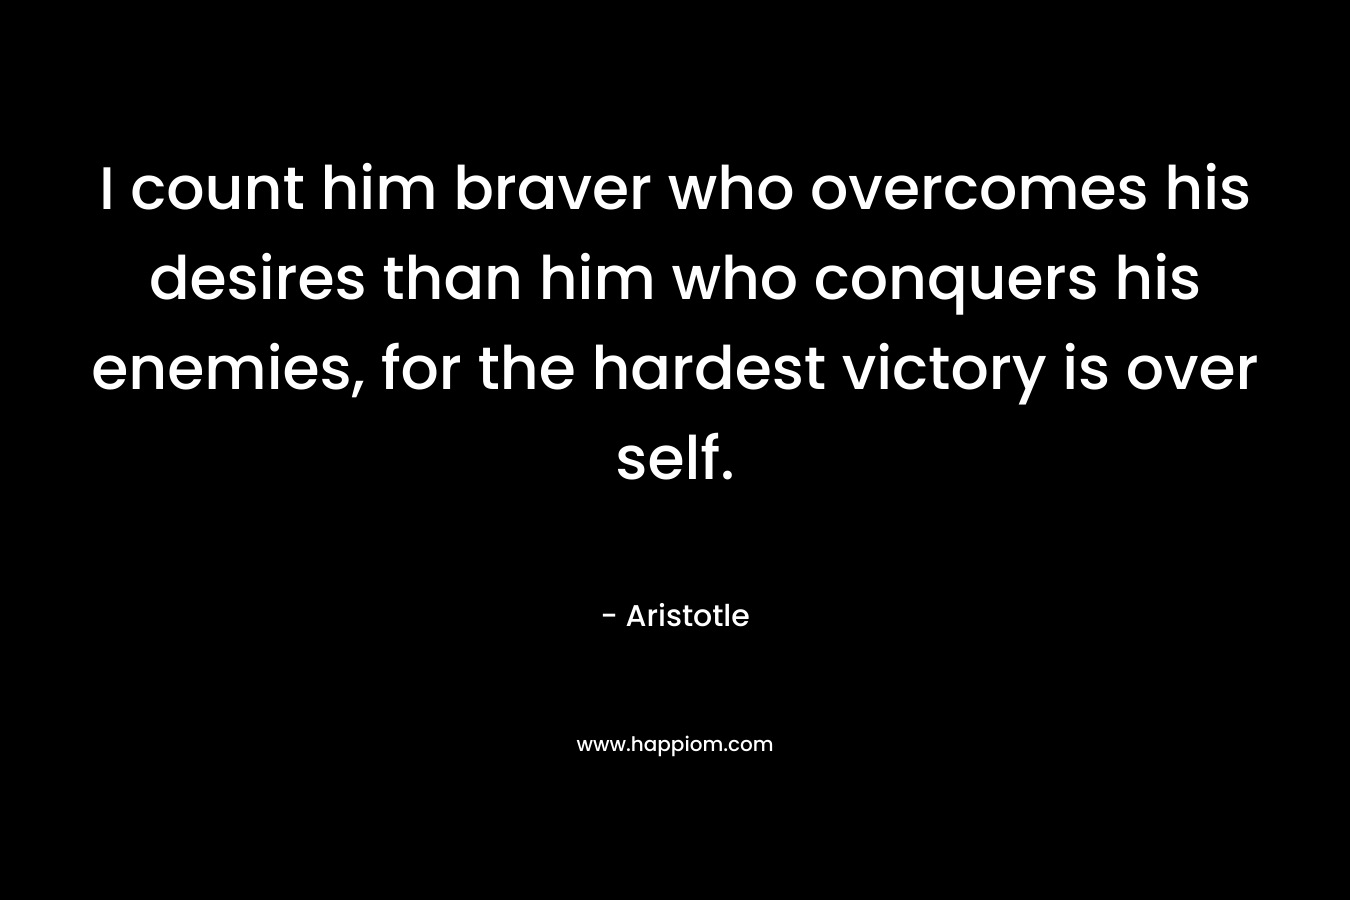 I count him braver who overcomes his desires than him who conquers his enemies, for the hardest victory is over self. – Aristotle